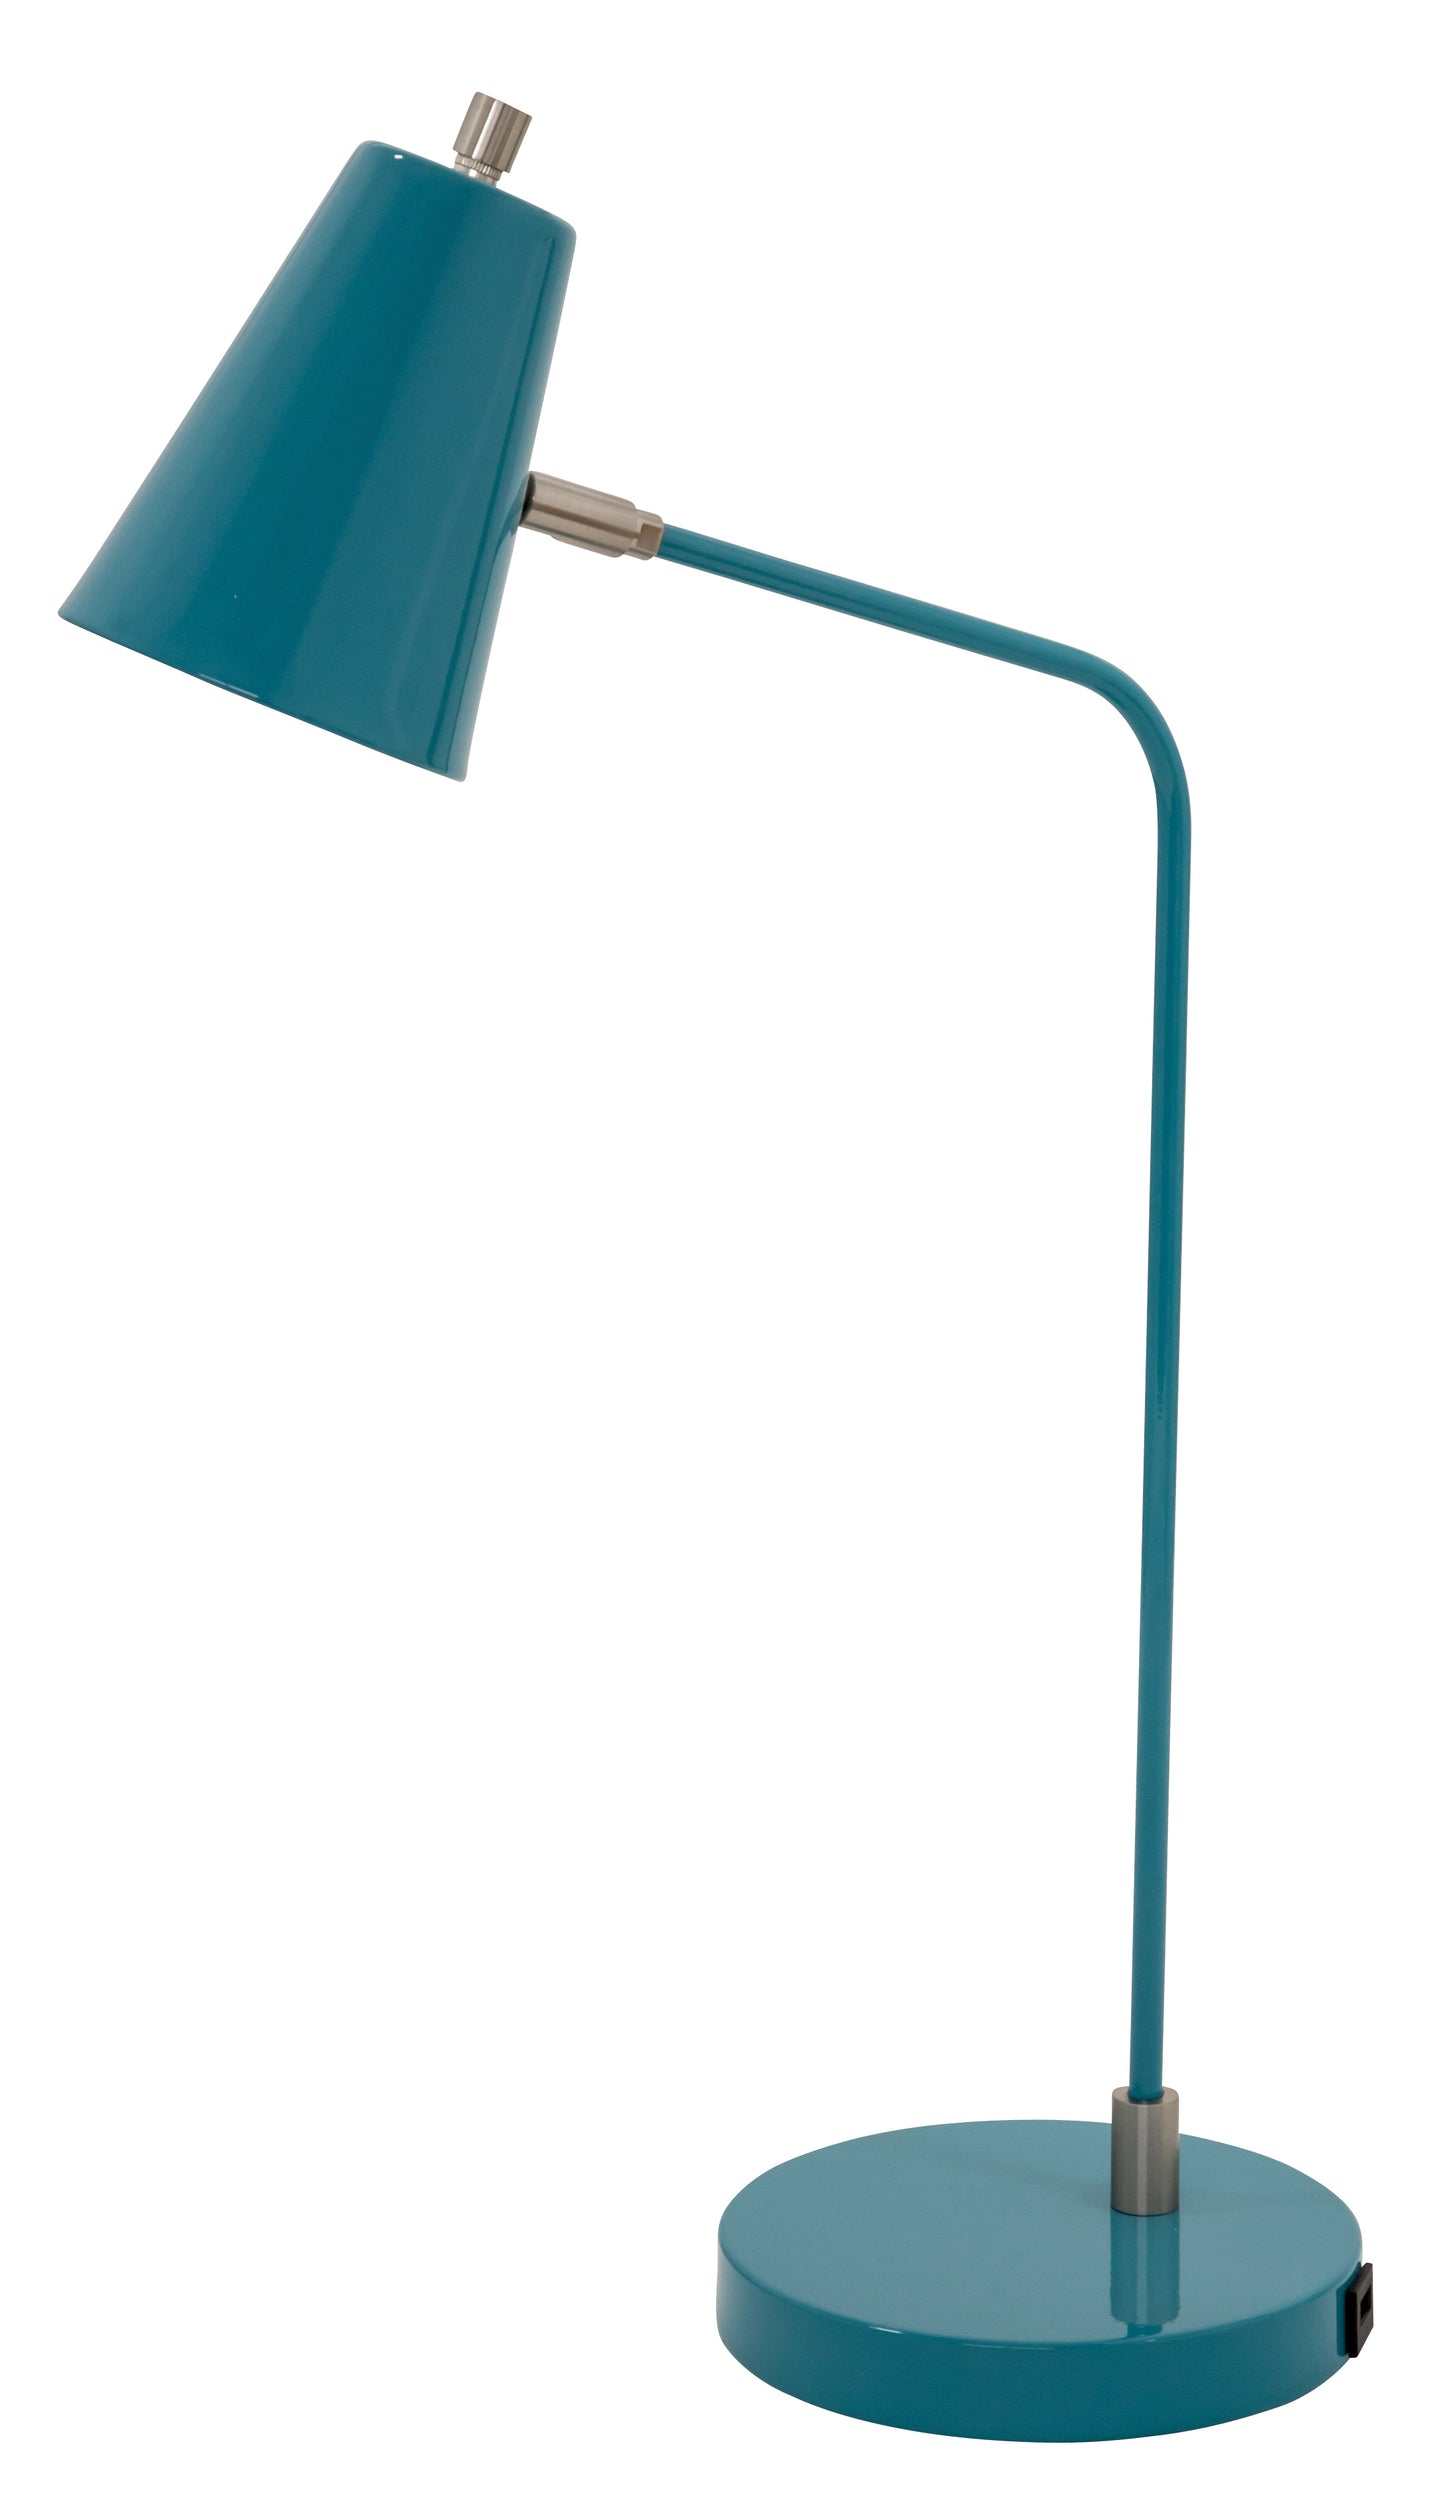 House of Troy Kirby LED task lamp in teal with satin nickel accents and USB port K150-TL